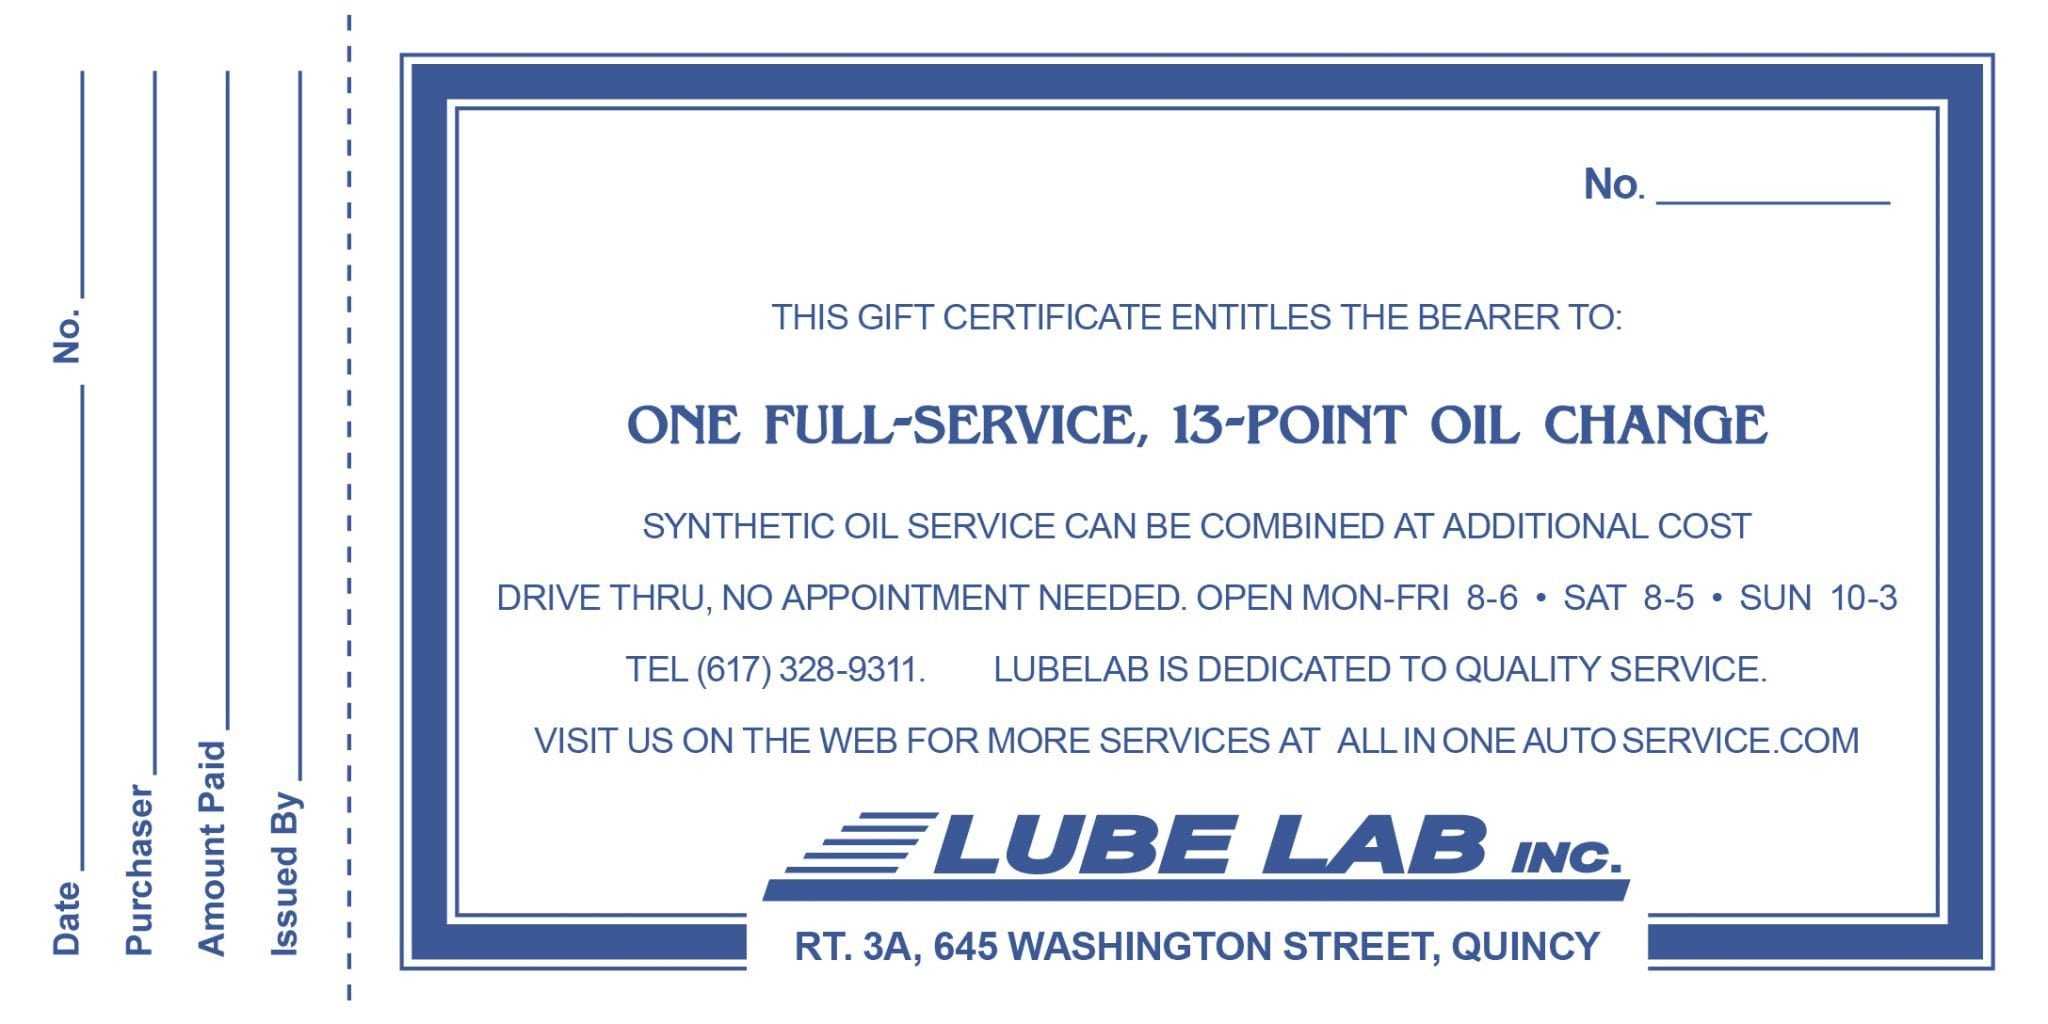 Full Service, 13 Point Oil Change | All In One & Lube Lab Intended For This Entitles The Bearer To Template Certificate